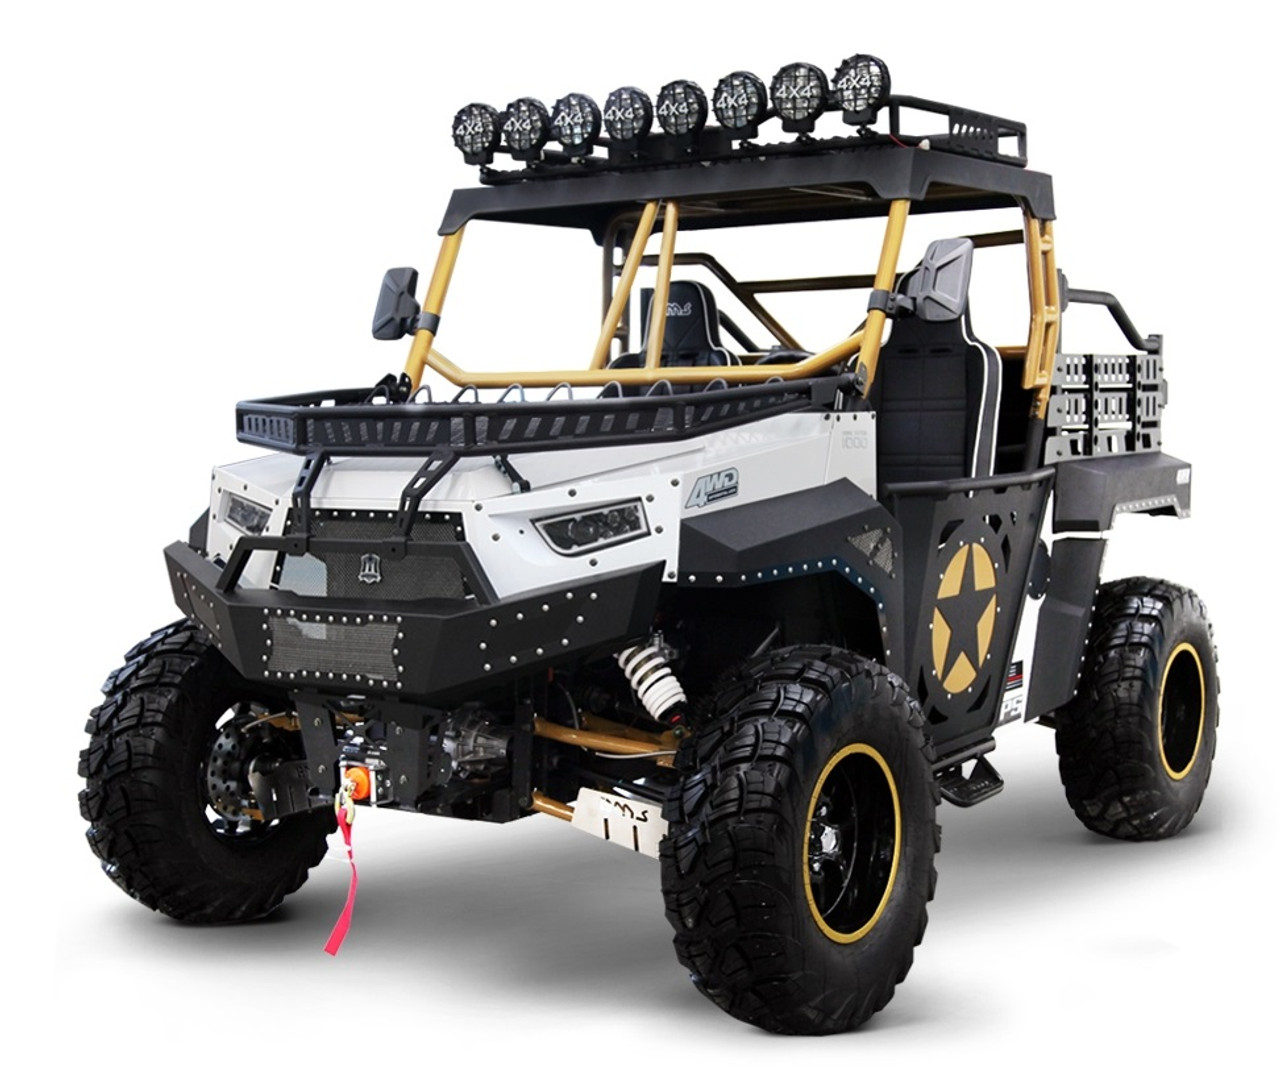 NEW BMS THE BEAST 1000 2S - 4X4 UTV, 81 HP, V-TWIN 996cc EFI , FULLY AUTOMATIC - Fully Assembled And Tested